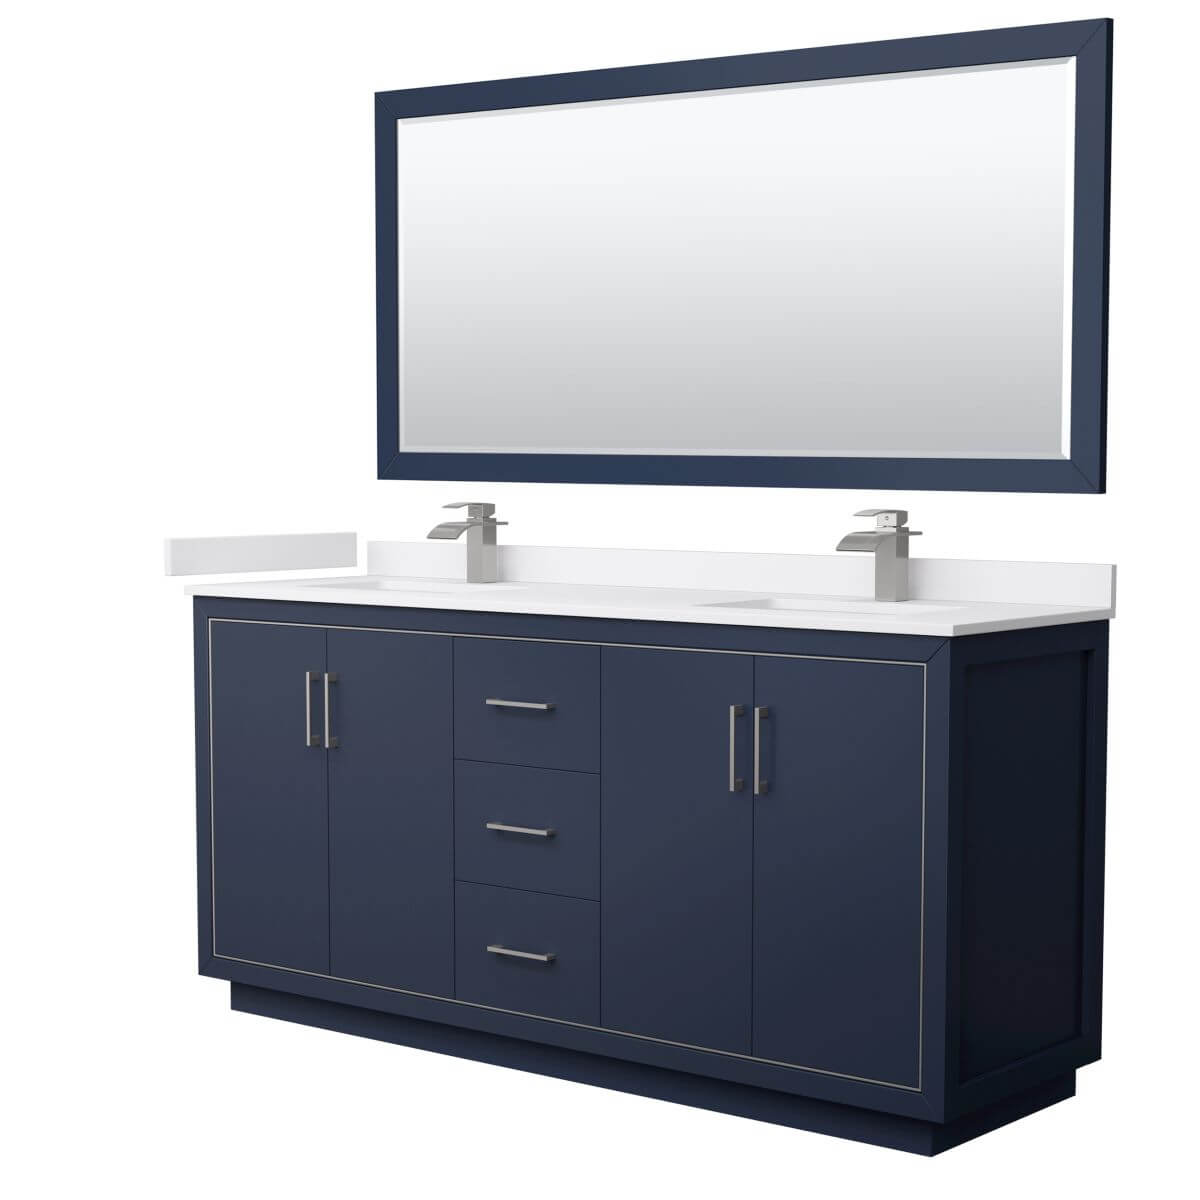 Wyndham Collection WCF111172DBNWCUNSM70 Icon 72 inch Double Bathroom Vanity in Dark Blue with White Cultured Marble Countertop, Undermount Square Sinks, Brushed Nickel Trim and 70 Inch Mirror